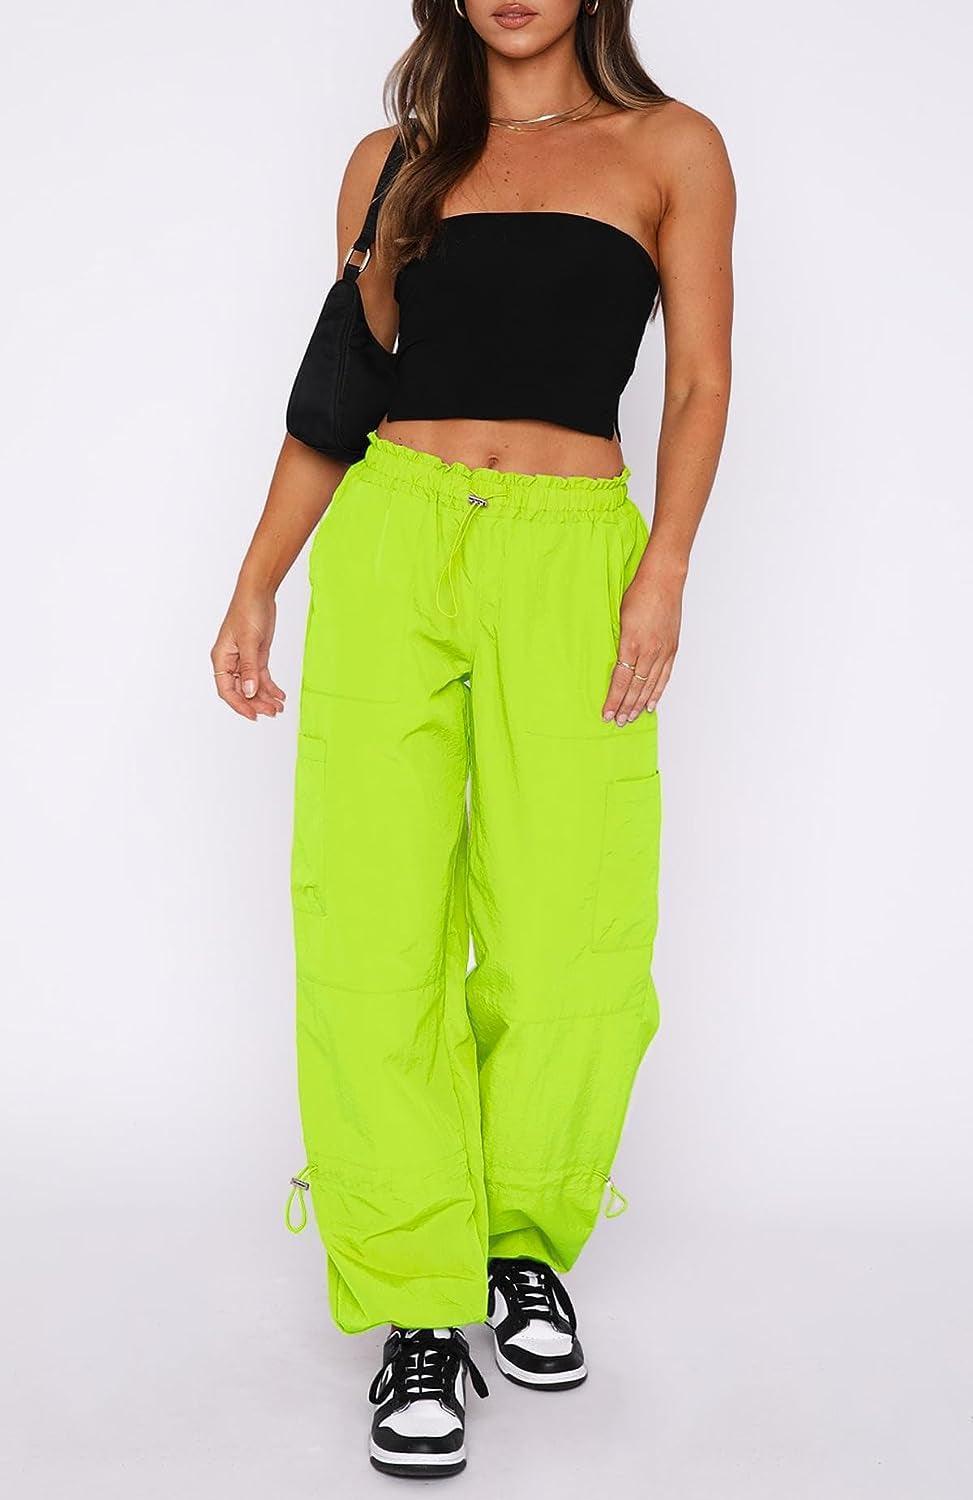 Street wear outfit  Green cargo pants outfit, Cargo pants women